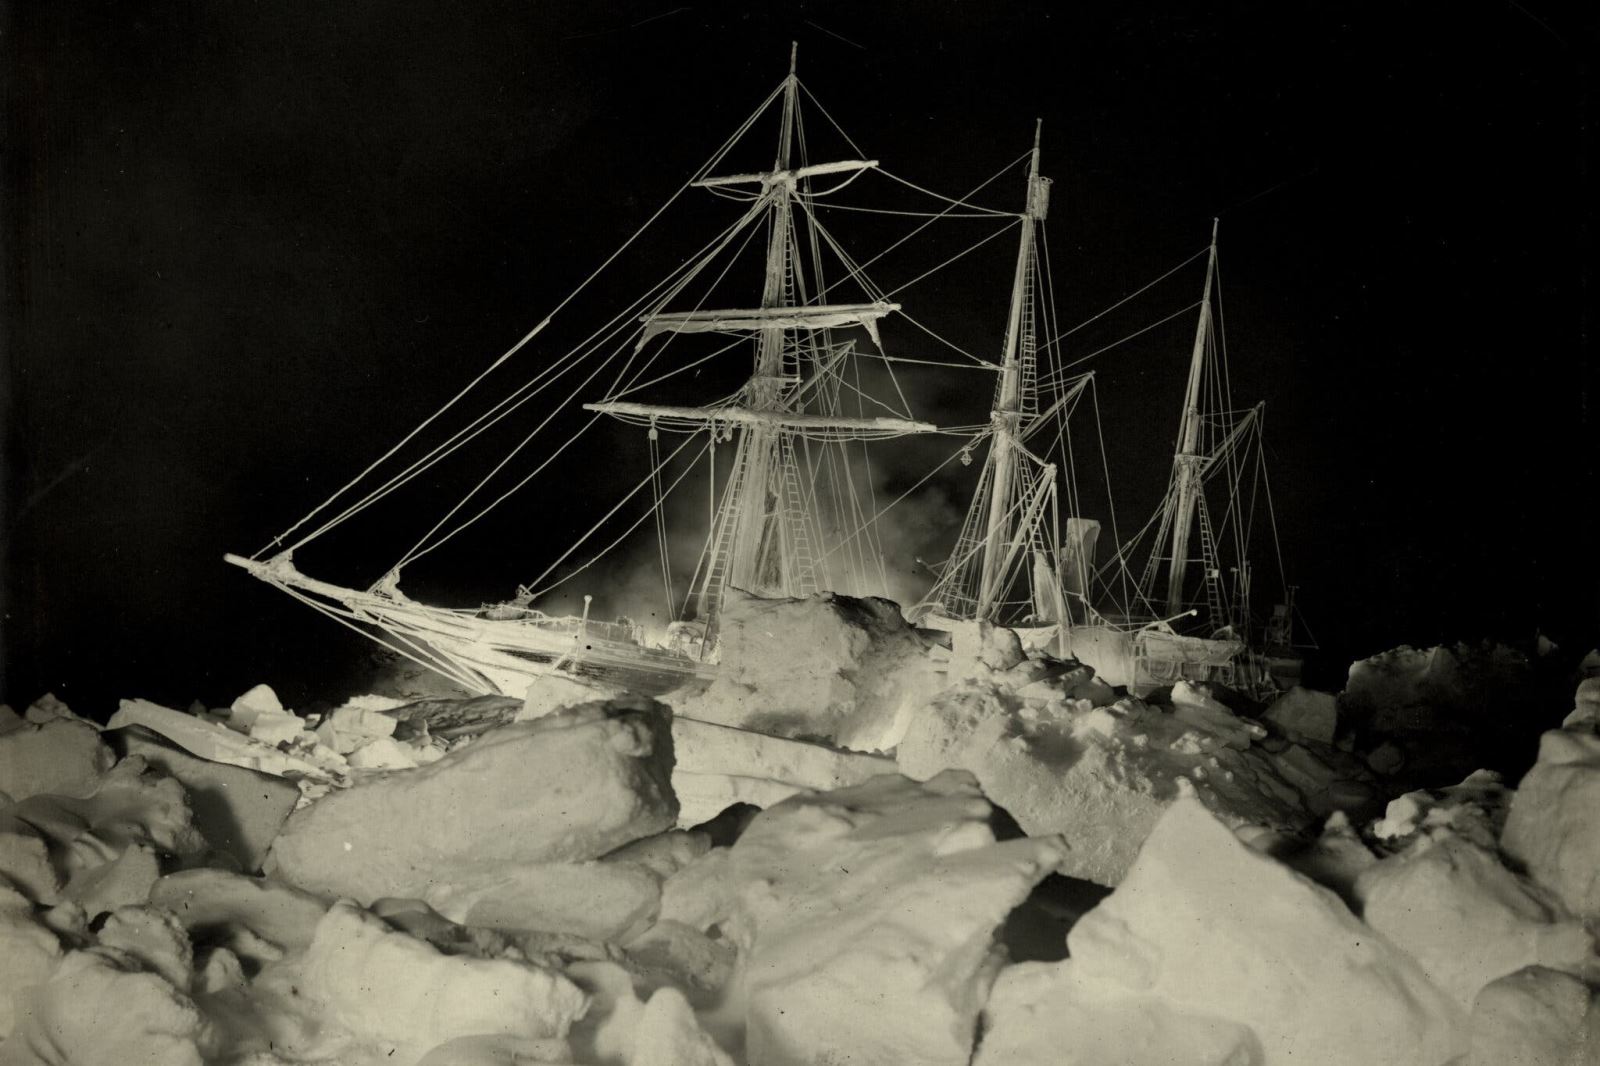 The most famous exploration ship in history on the bottom of the Antarctic sea - Photo 3.